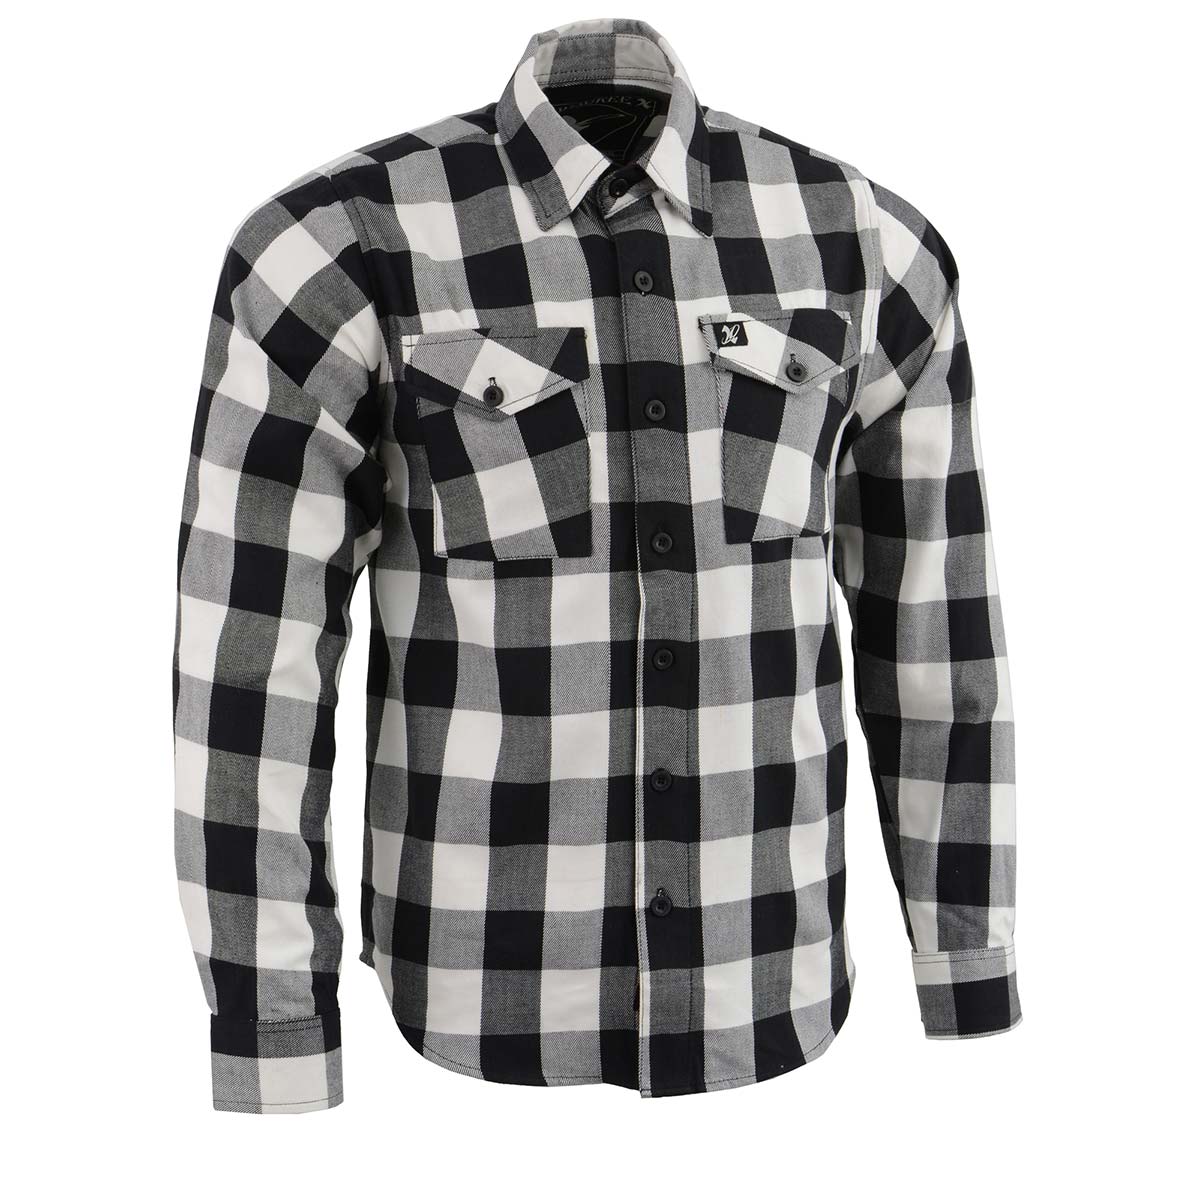 Milwaukee Leather Men's Flannel Plaid Shirt Black and White Long Sleeve Cotton Button Down Shirt MNG11633